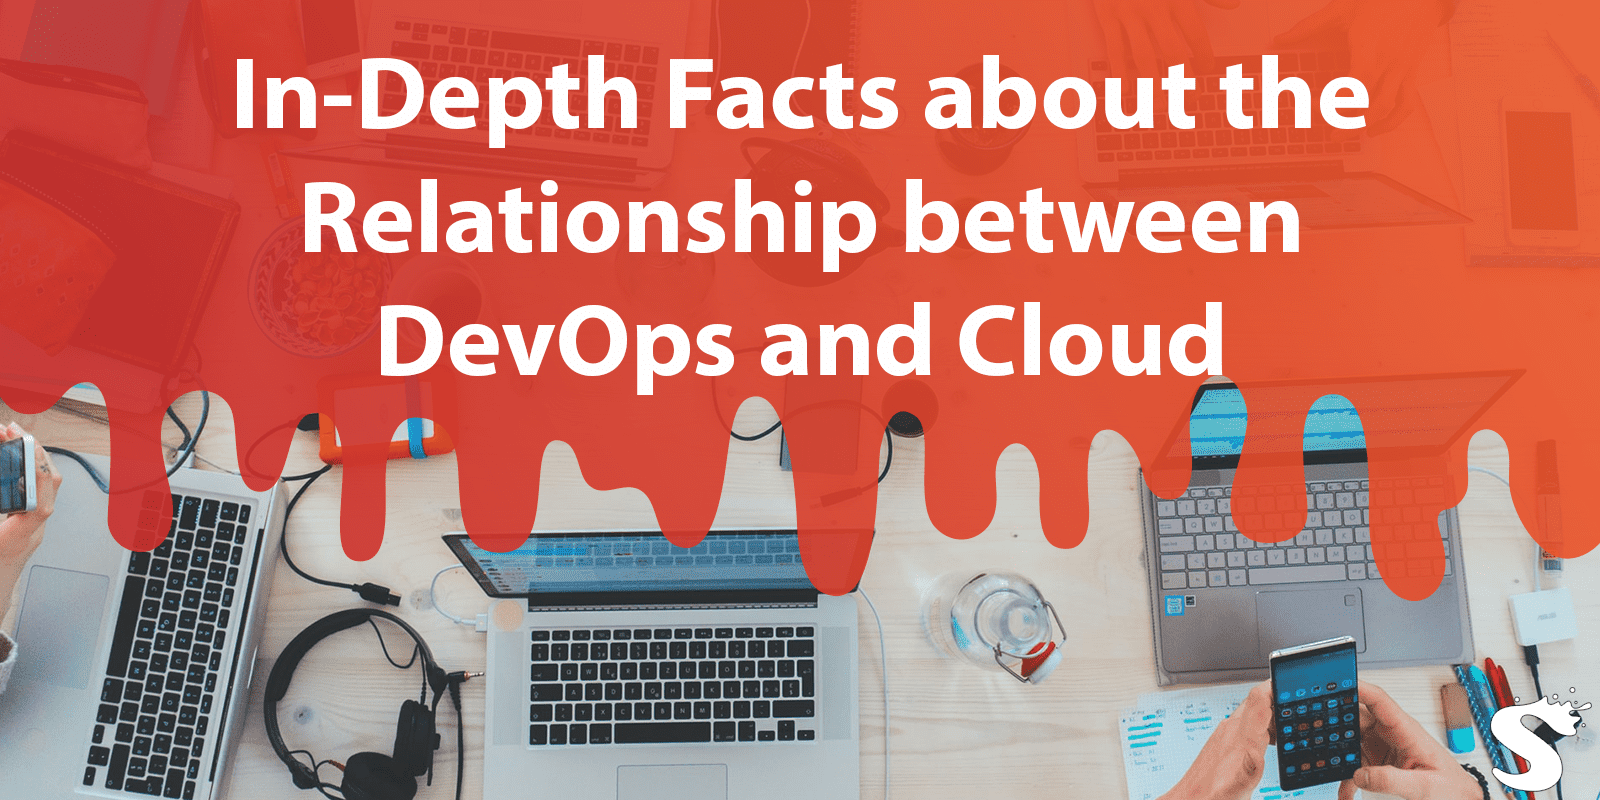 In-Depth Facts about the Relationship between DevOps and Cloud Computing